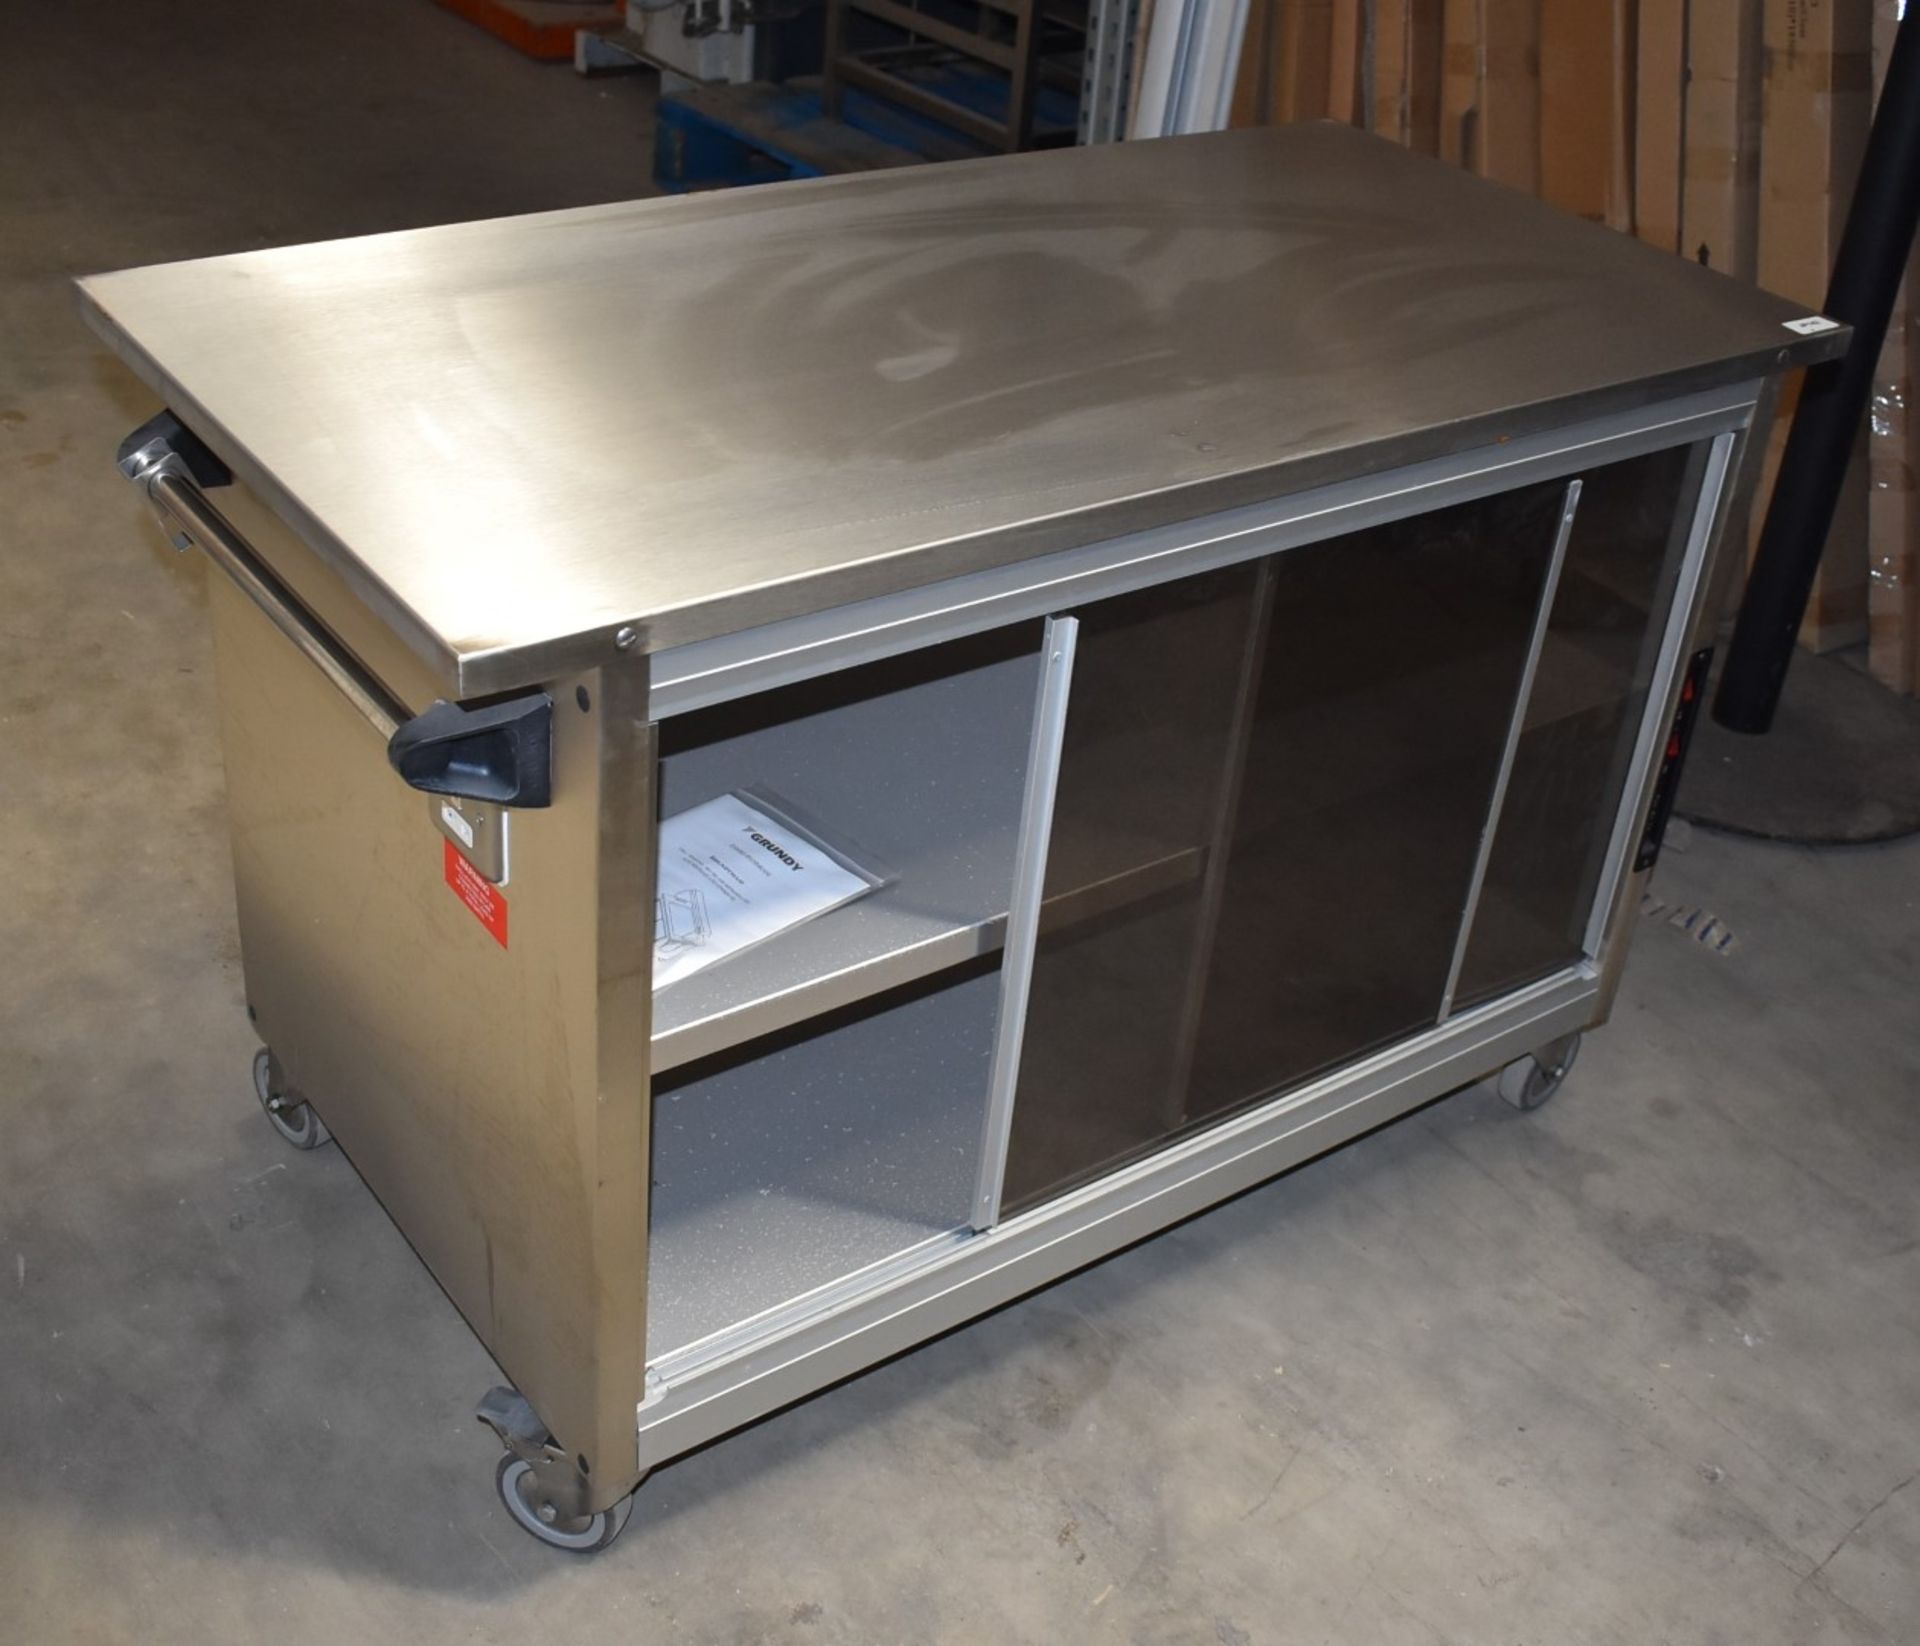 1 x Grundy Maid Mobile Food Warming Unit With Stainless Steel Top and Smoked Glass Doors - Ref JP142 - Image 11 of 16